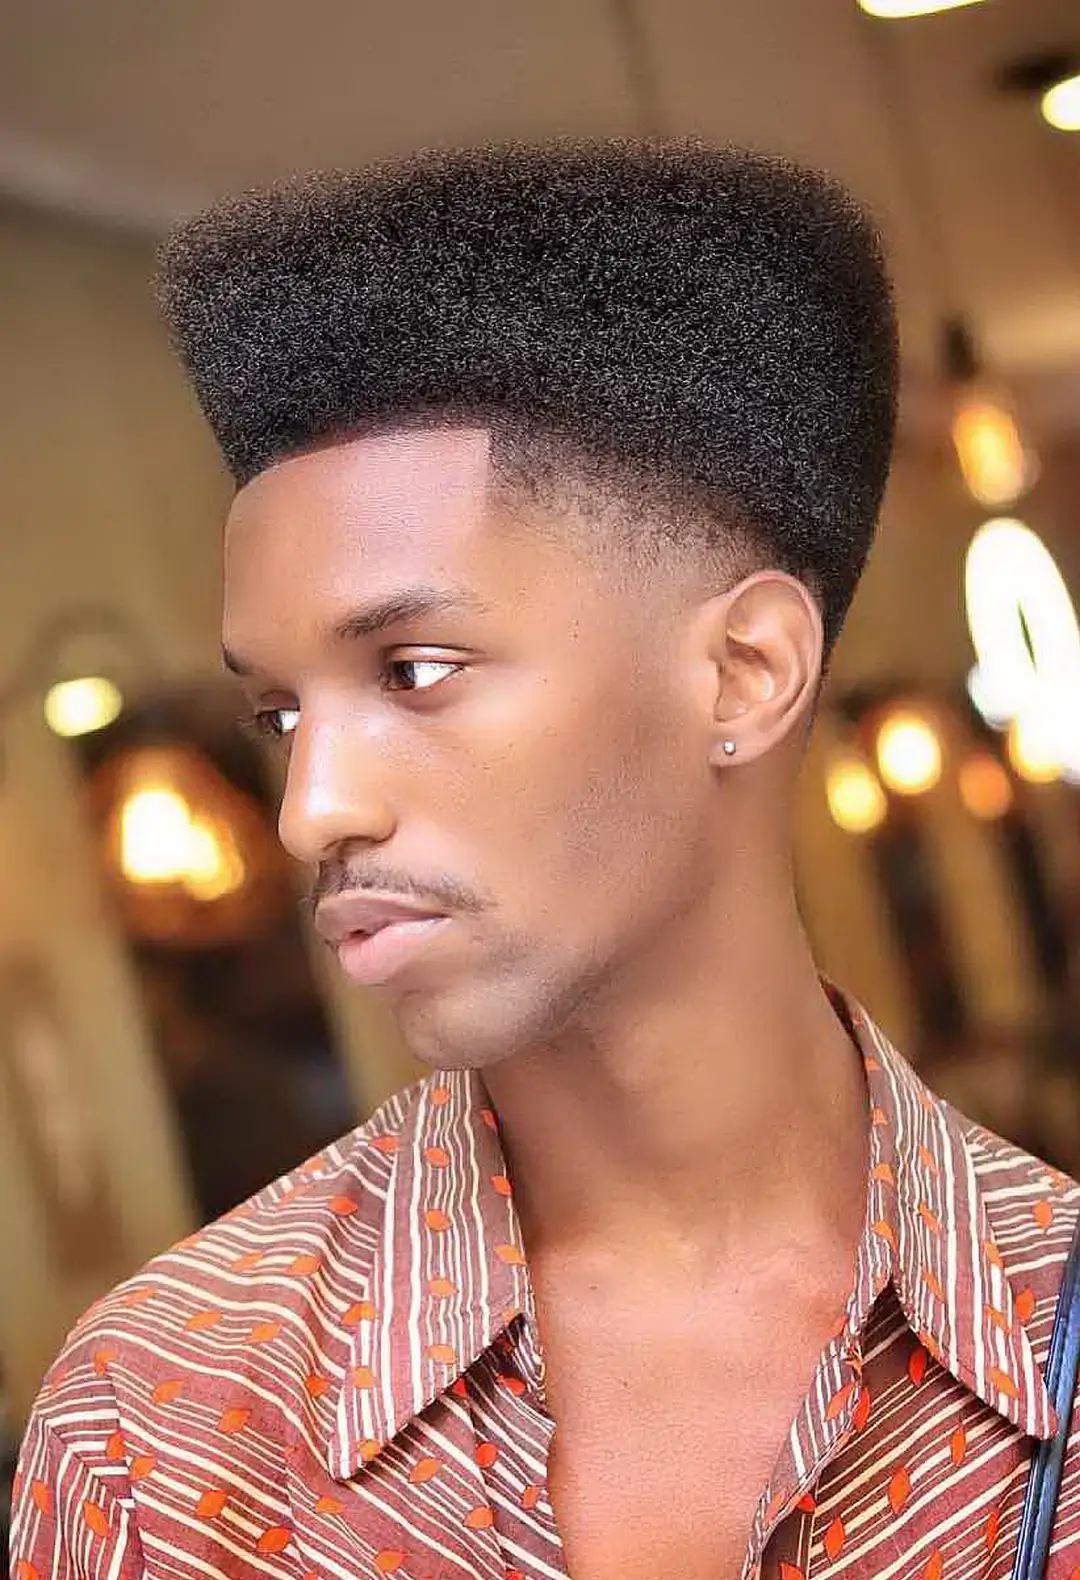 Men's High Flat Top Haircut from Fifth Ave Barber Shop in Midtown NYC